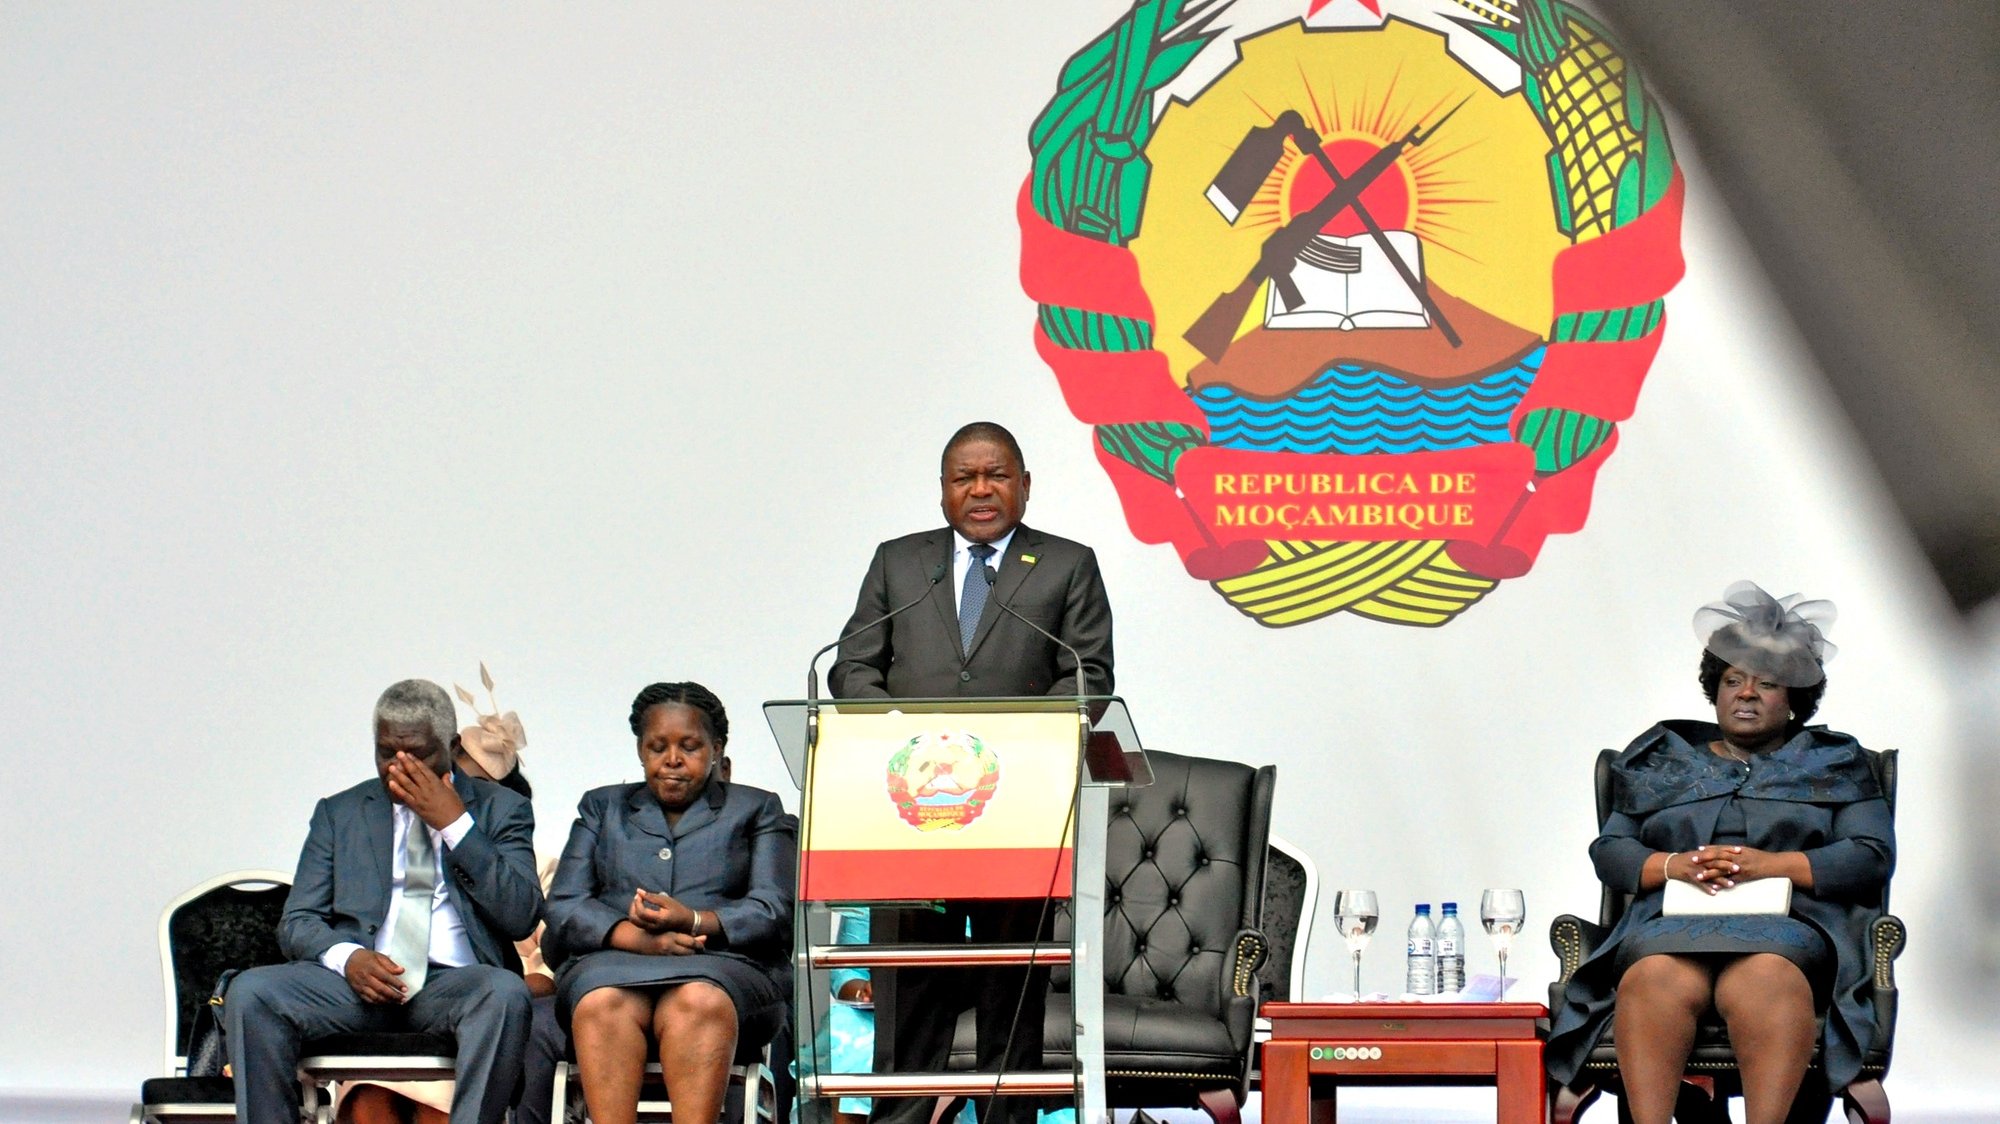 Mozambique&#039;s President Filipe Nyusi (C) accompanied by his wife Isaura Nyusi (R) addresses his speech during the inauguration ceremony at Independence Square in Maputo, Mozambique, 15 January 2019. The leader of the Mozambique Liberation Front (Frelimo) was re-elected on the first round for a second term, with 73 percent of the vote, and his party had a two-thirds majority in parliament. ANTONIO SILVA/LUSA